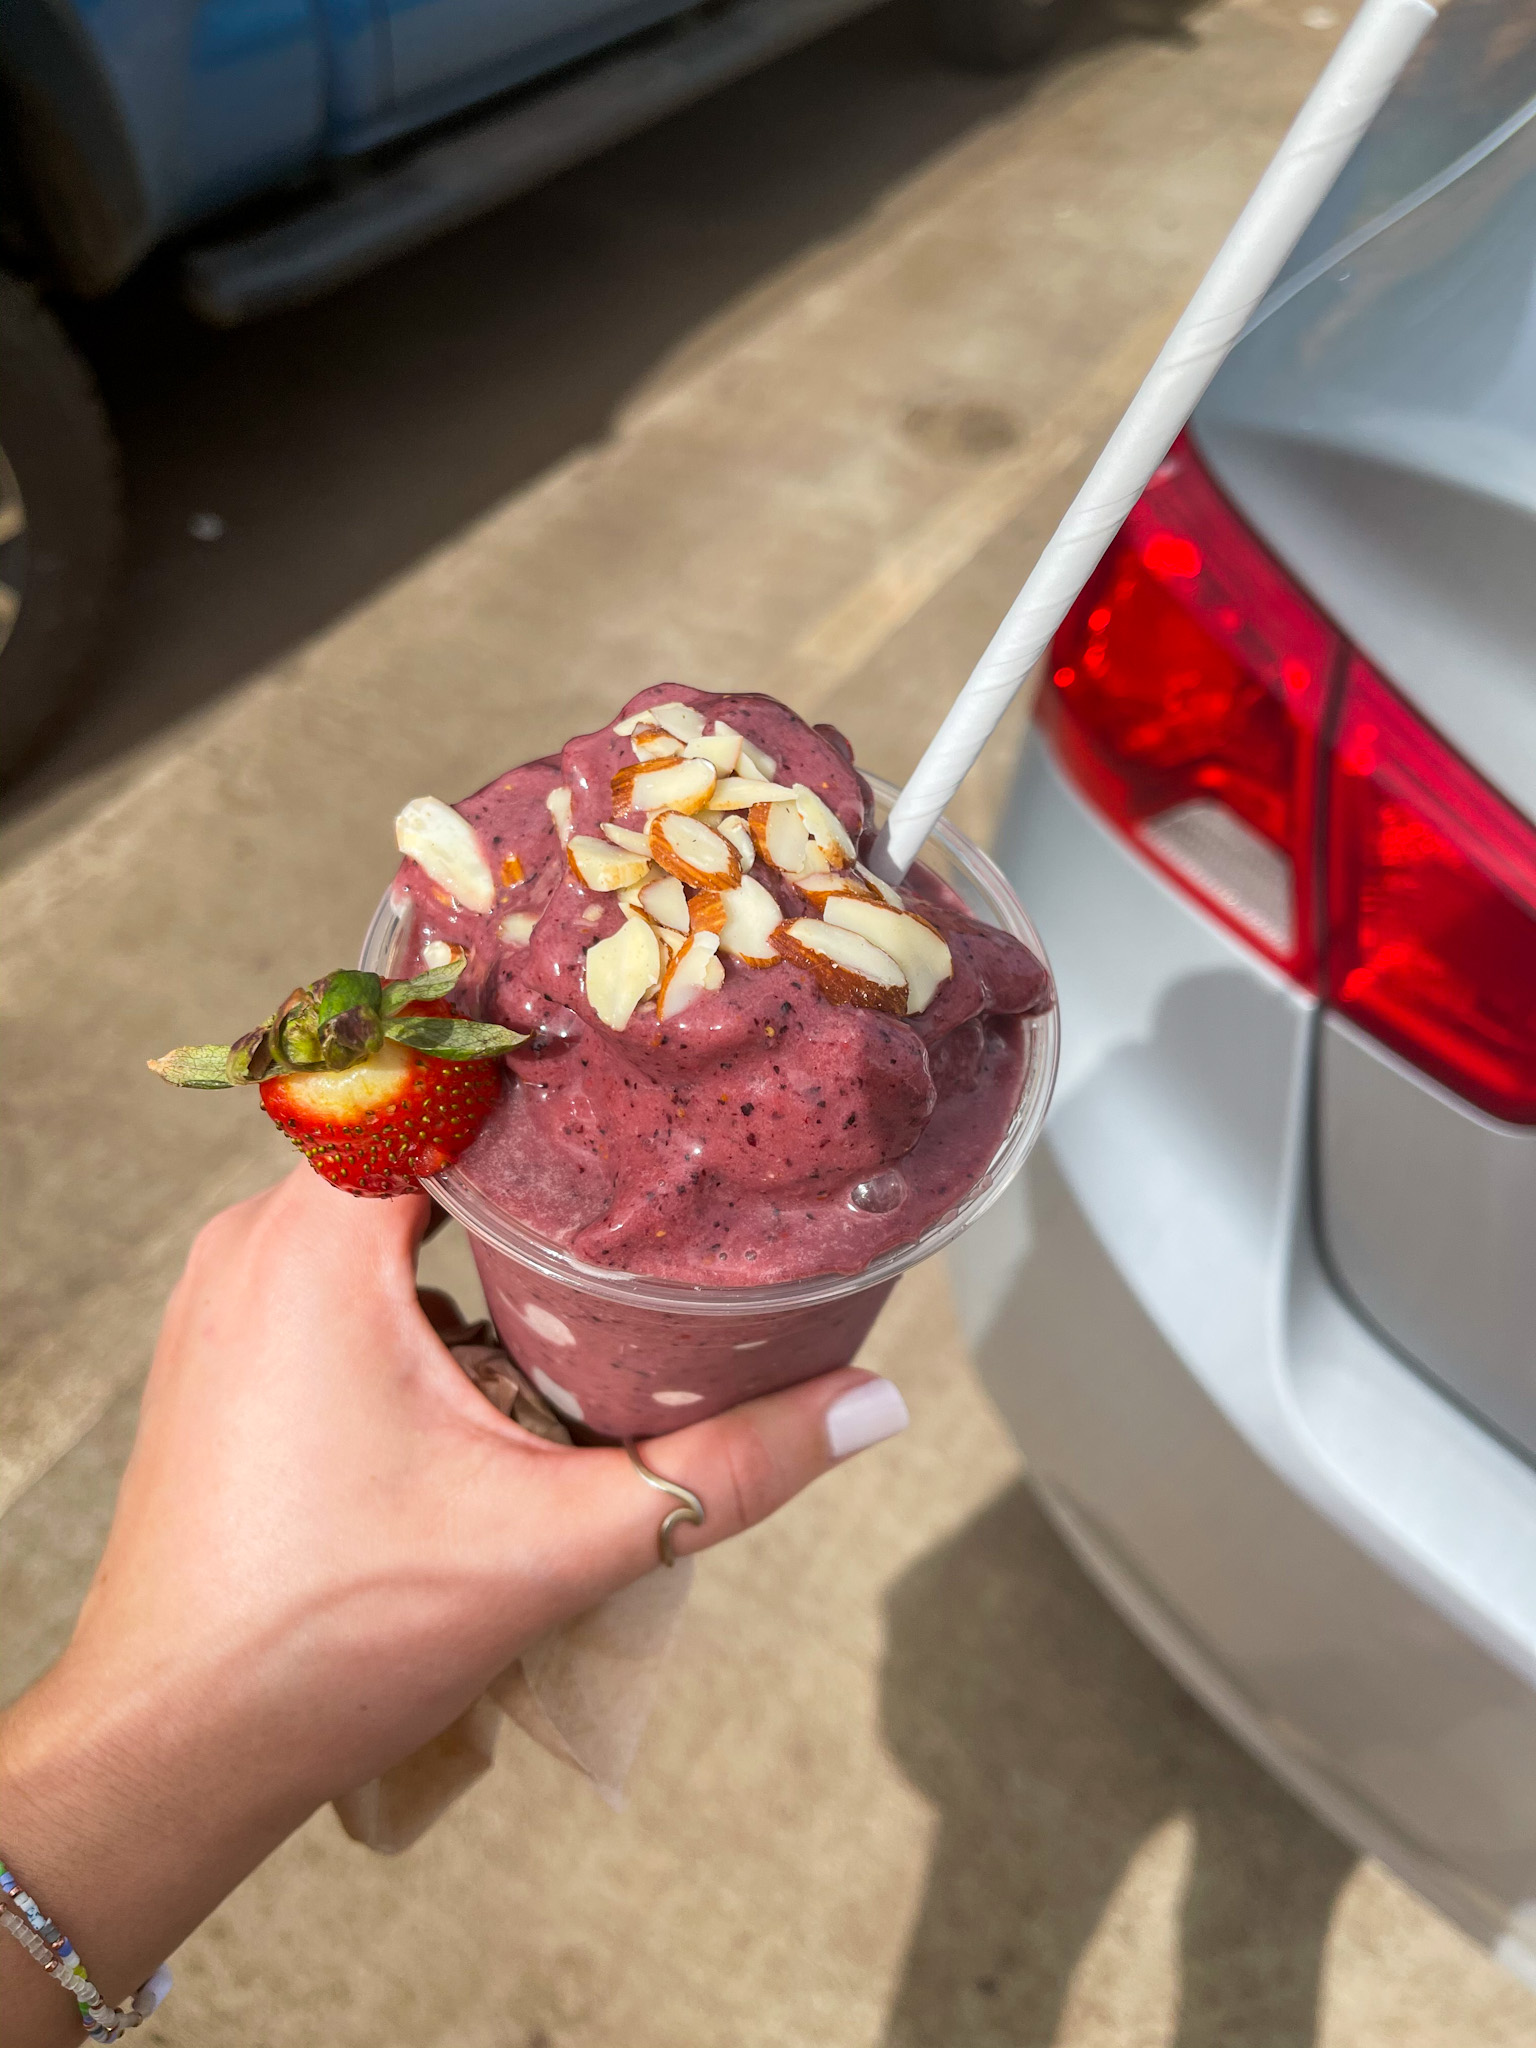 Acai smoothie from Haleiwa Bowls, North Shore, Oahu, Hawaii